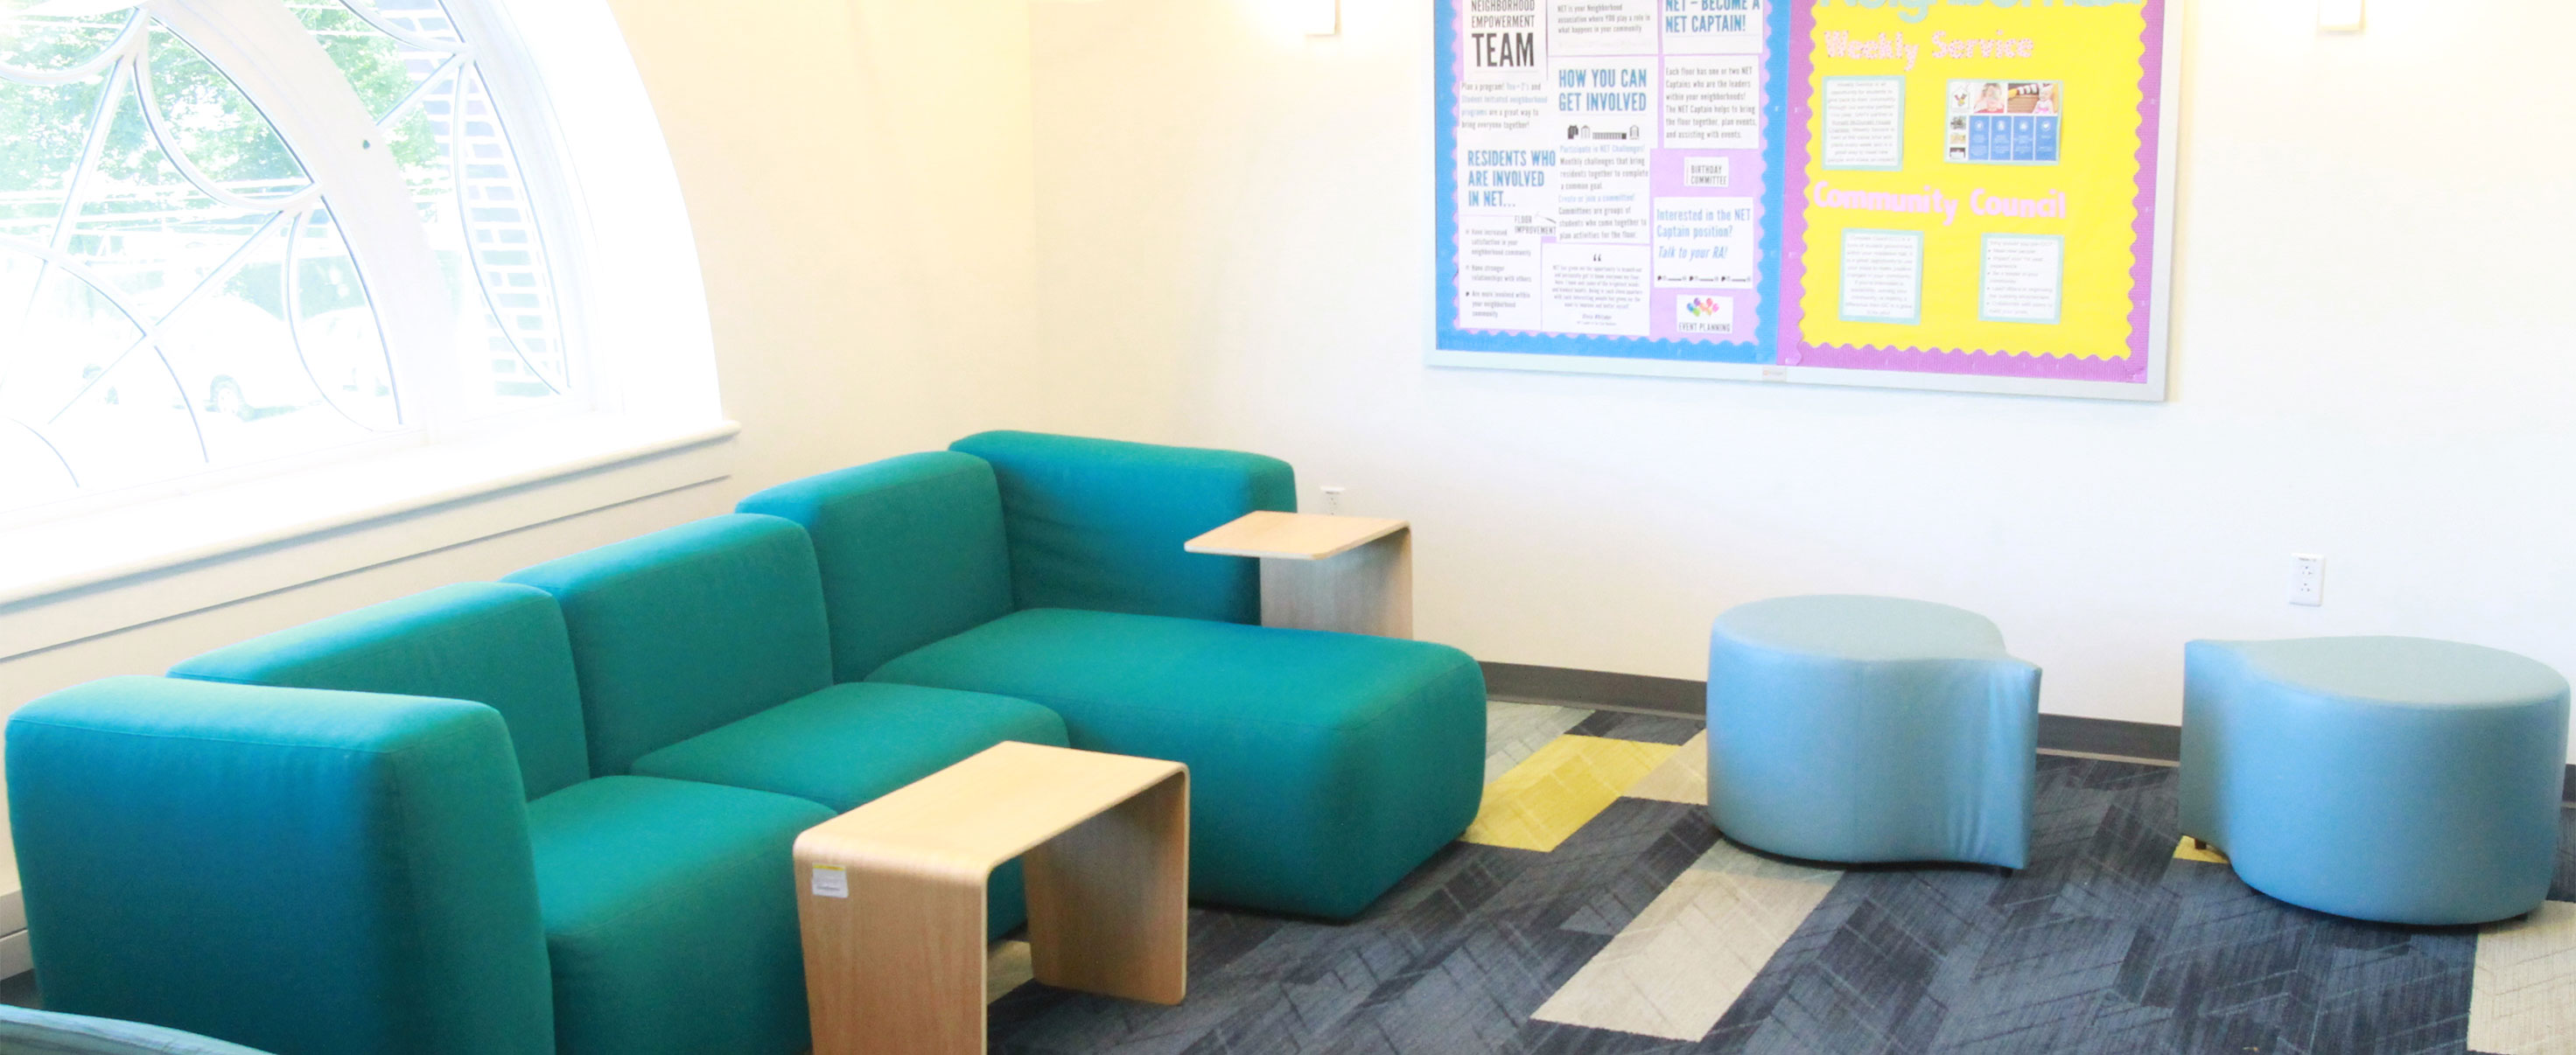 Common area with bright colored couches and stools